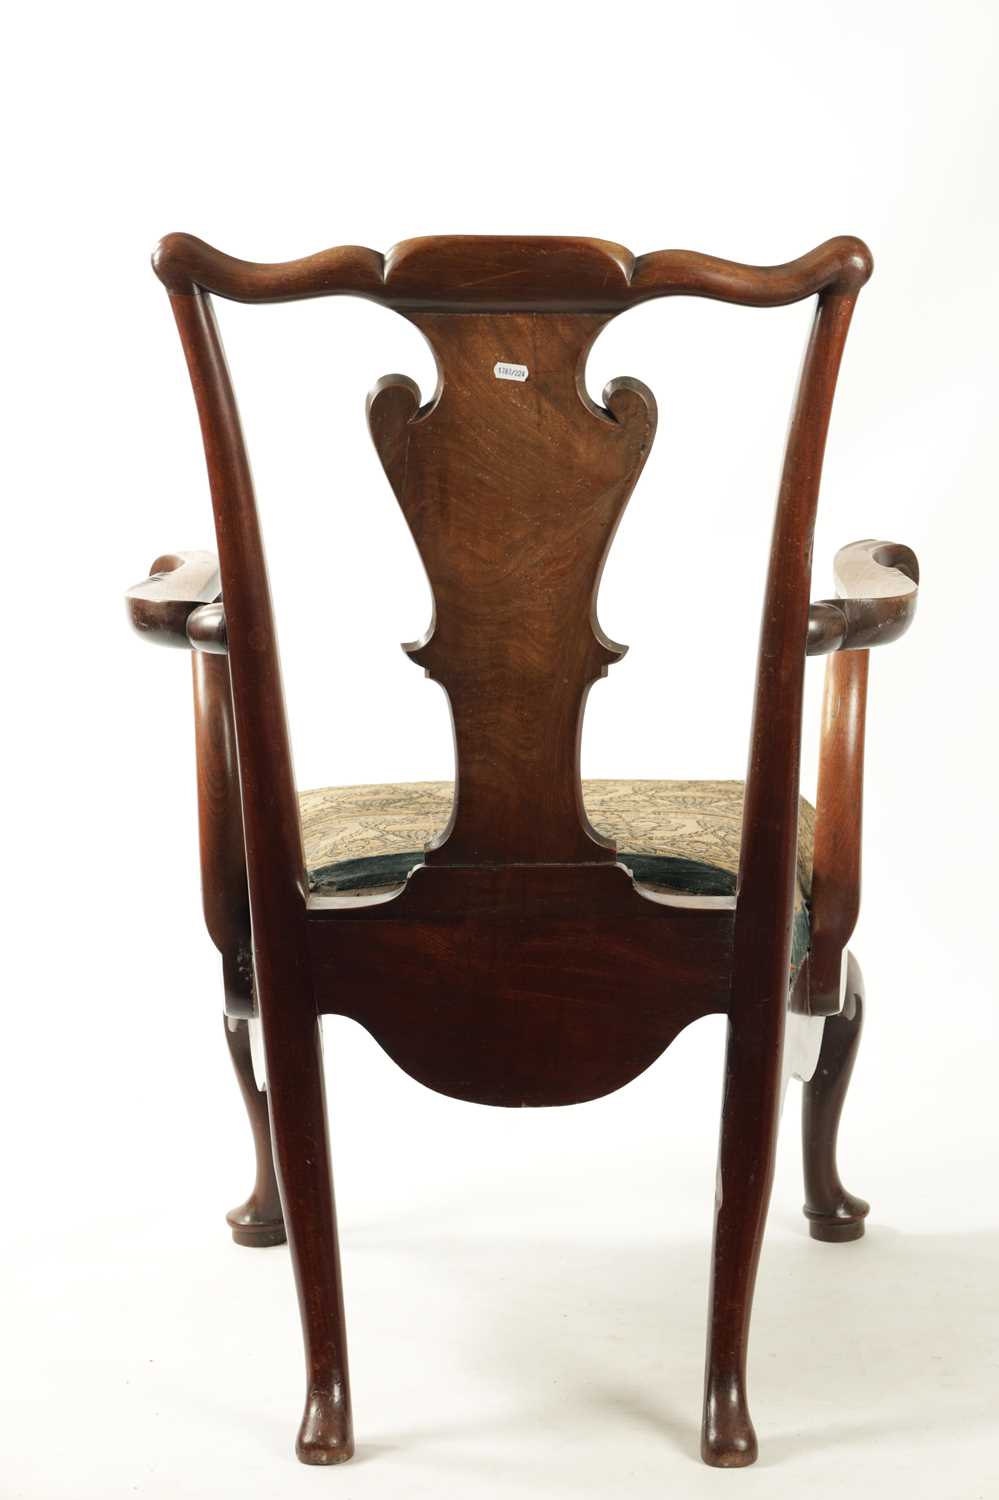 AN 18TH CENTURY FIGURED MAHOGANY COMMODE CHAIR - Image 6 of 6